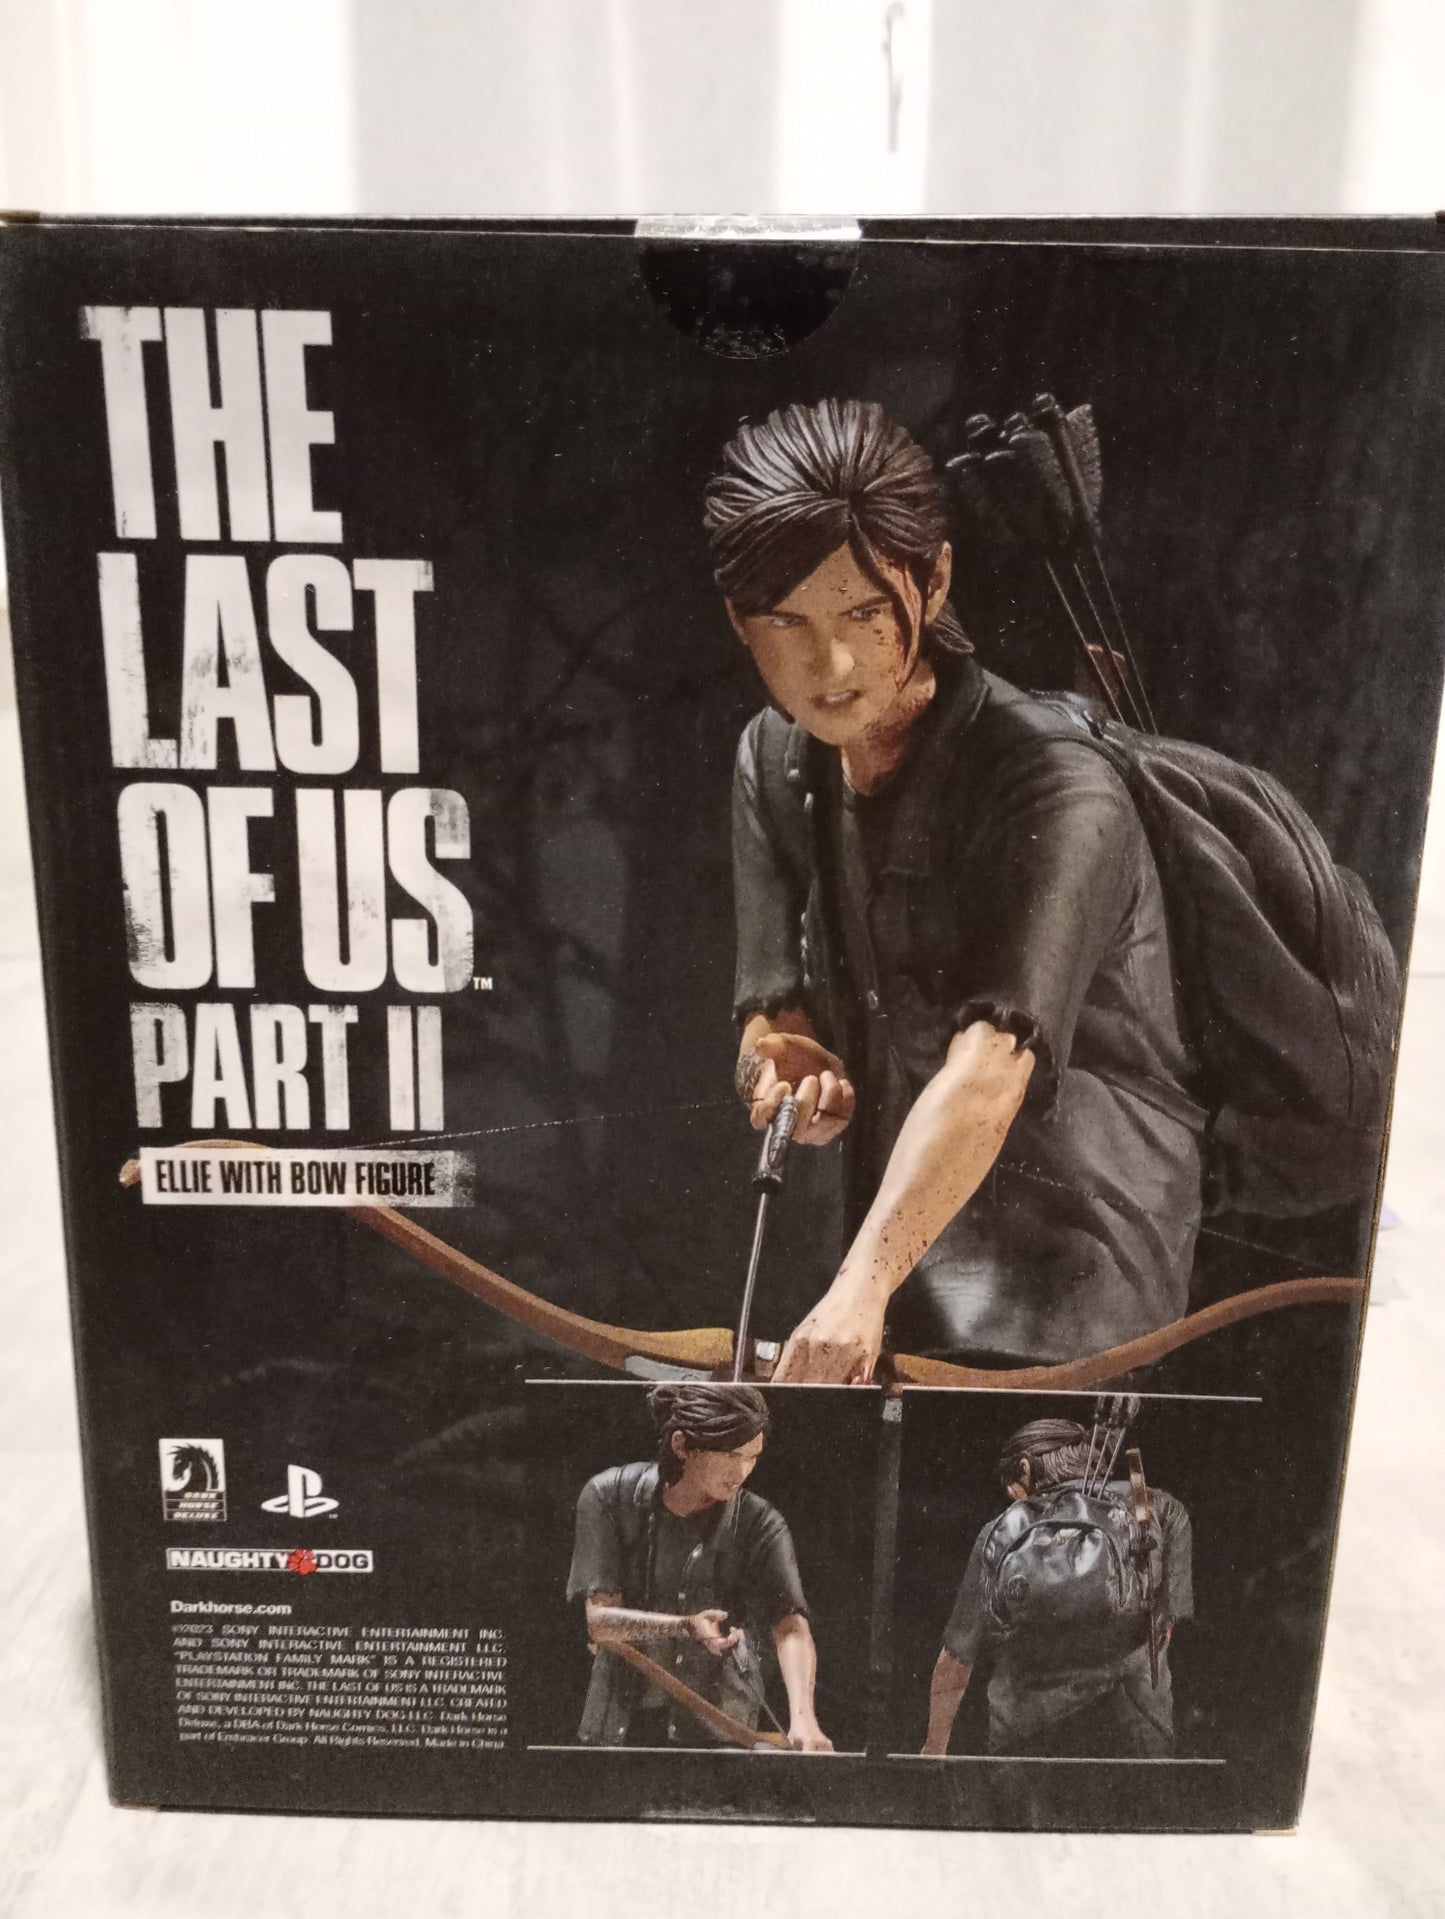 Elle with bow figure: The last of us II